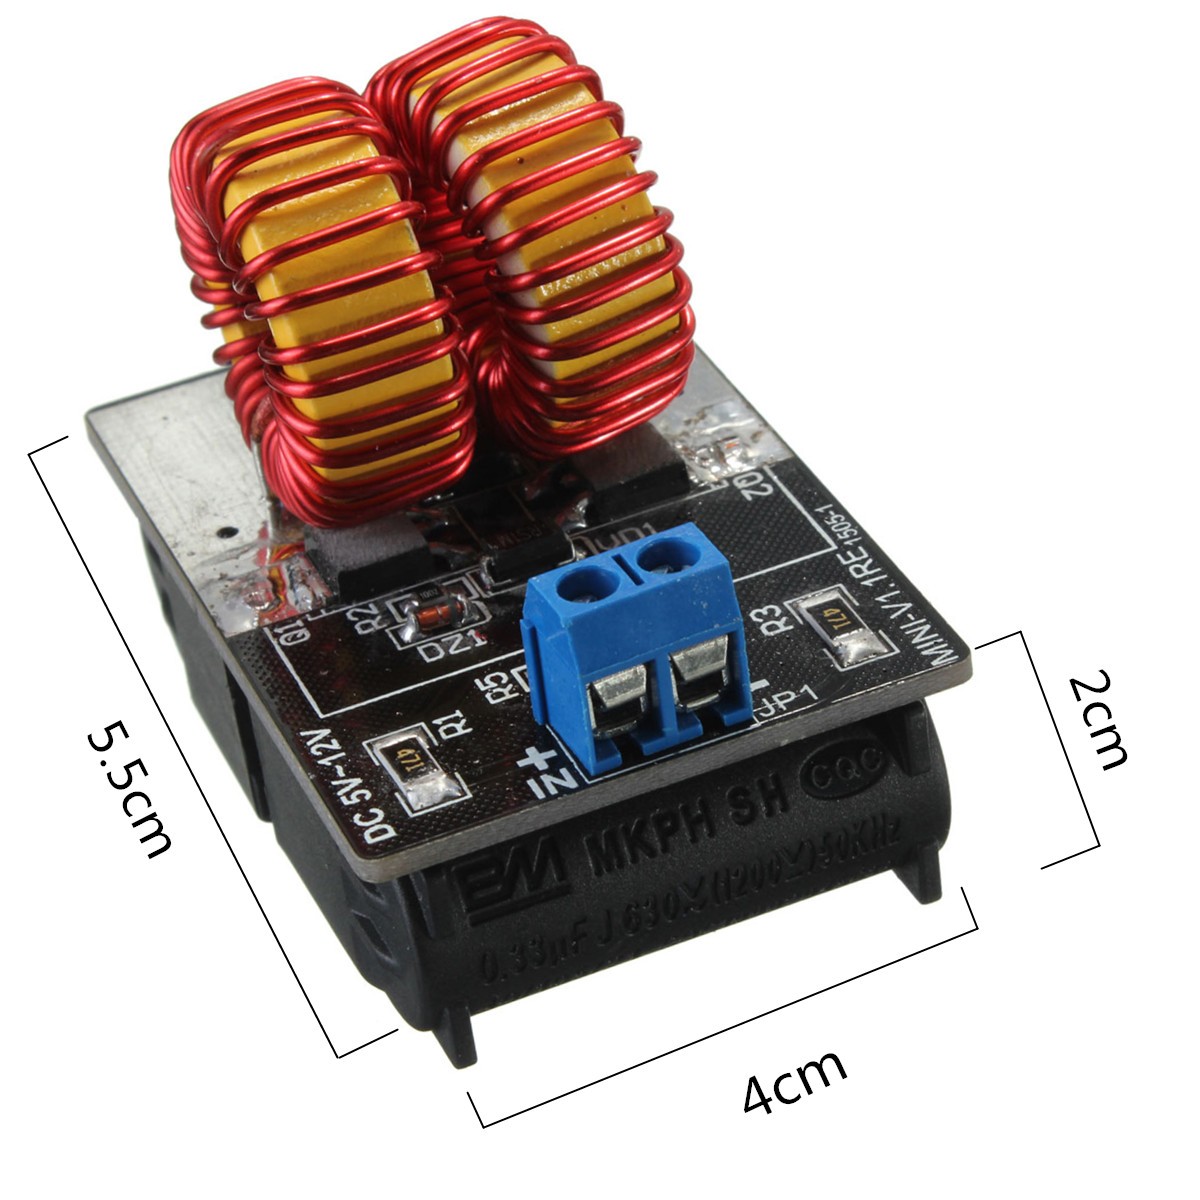 Geekcreitreg-5V--12V-ZVS-Induction-Heating-Power-Supply-Module-With-Coil-1015637-8